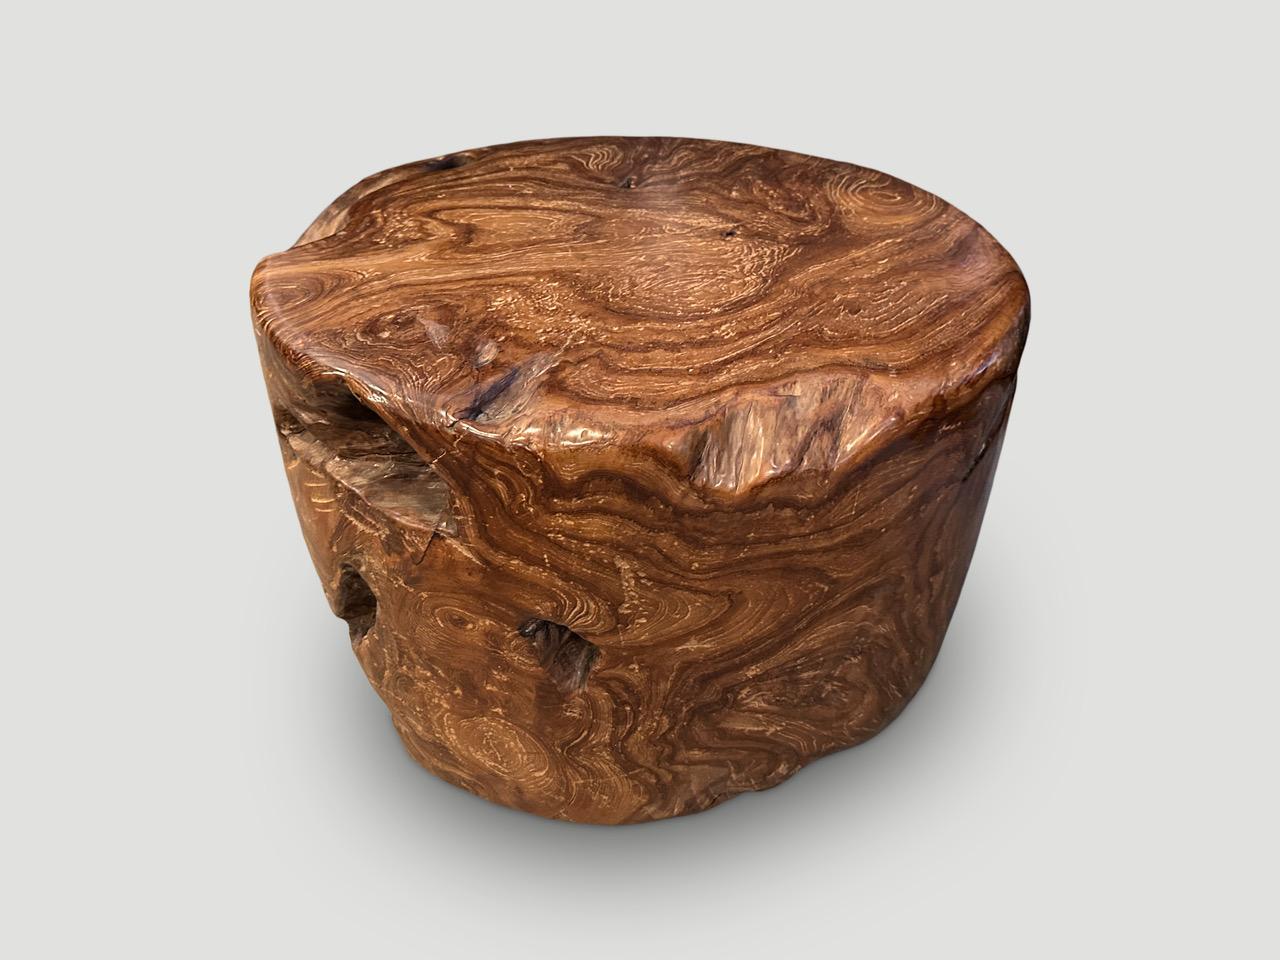 Century old solid teak wood coffee table or side table. Taken from my finest collection and hand shaped into this stunning piece of art. Both usable and sculptural. We added a natural oil revealing the beautiful wood grain. It’s all in the